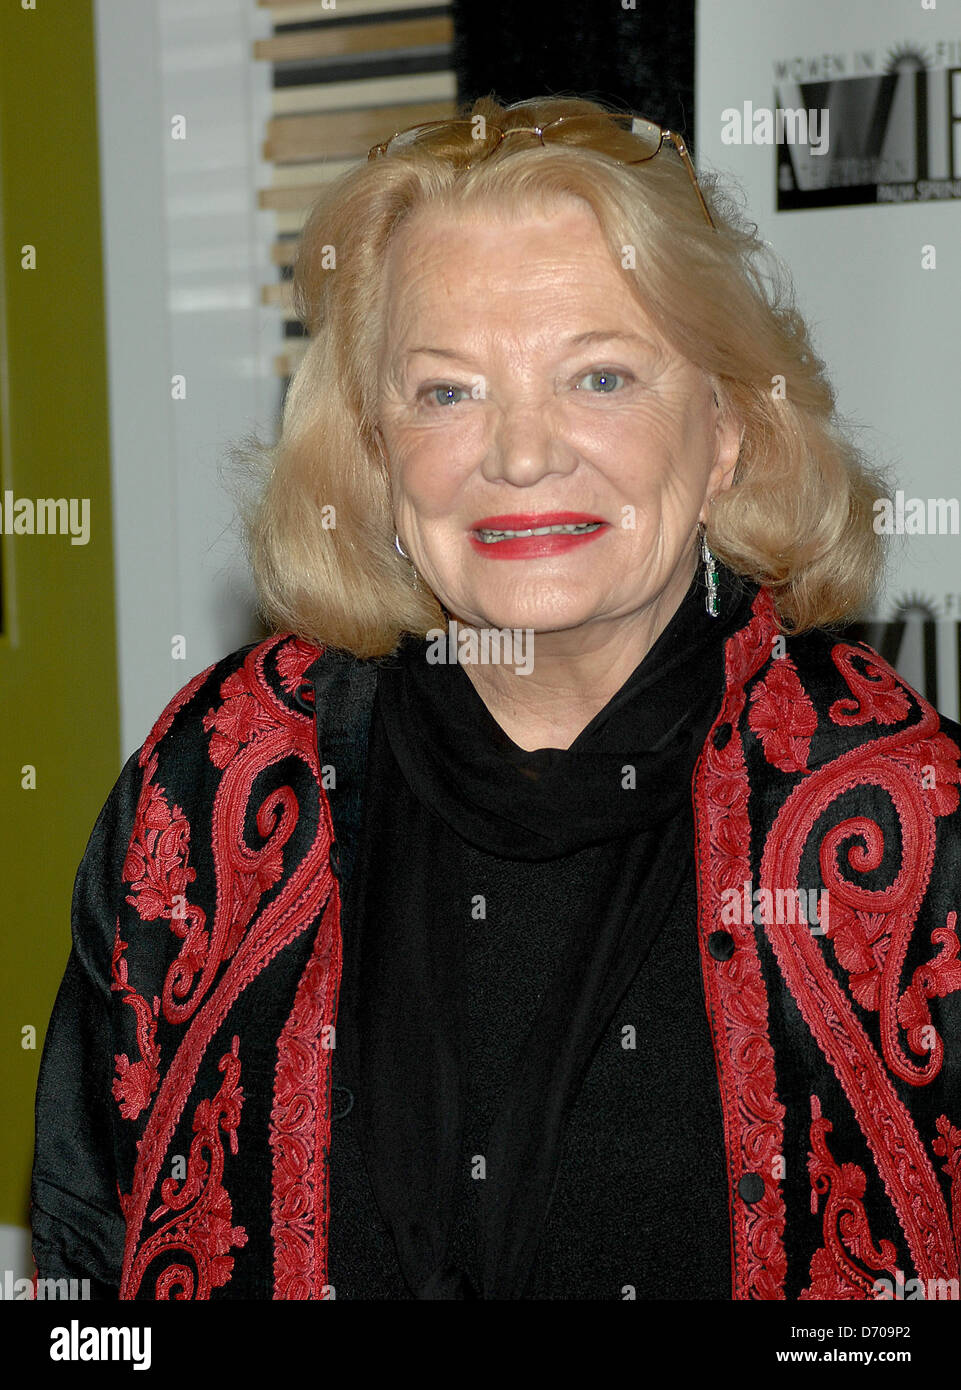 Gena Rowlands Palm Springs Women In Film & Television presents the Fourth  Annual Broken Glass Awards held at The Show Theatre at the Agua Caliente  Casino Resort Spa - Arrivals Palm Desert